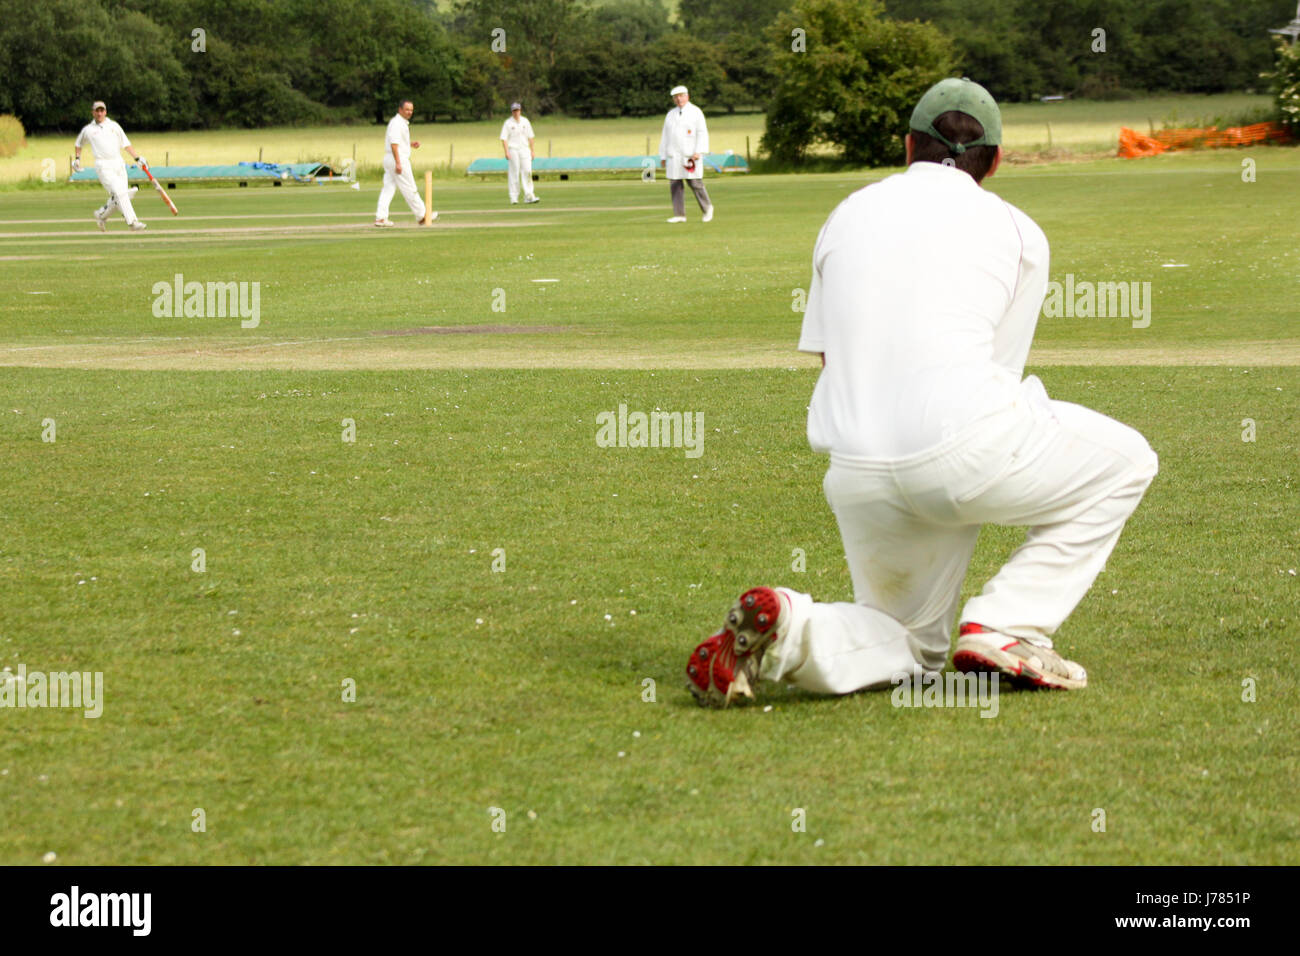 Fielding at a game of cricket Stock Photo